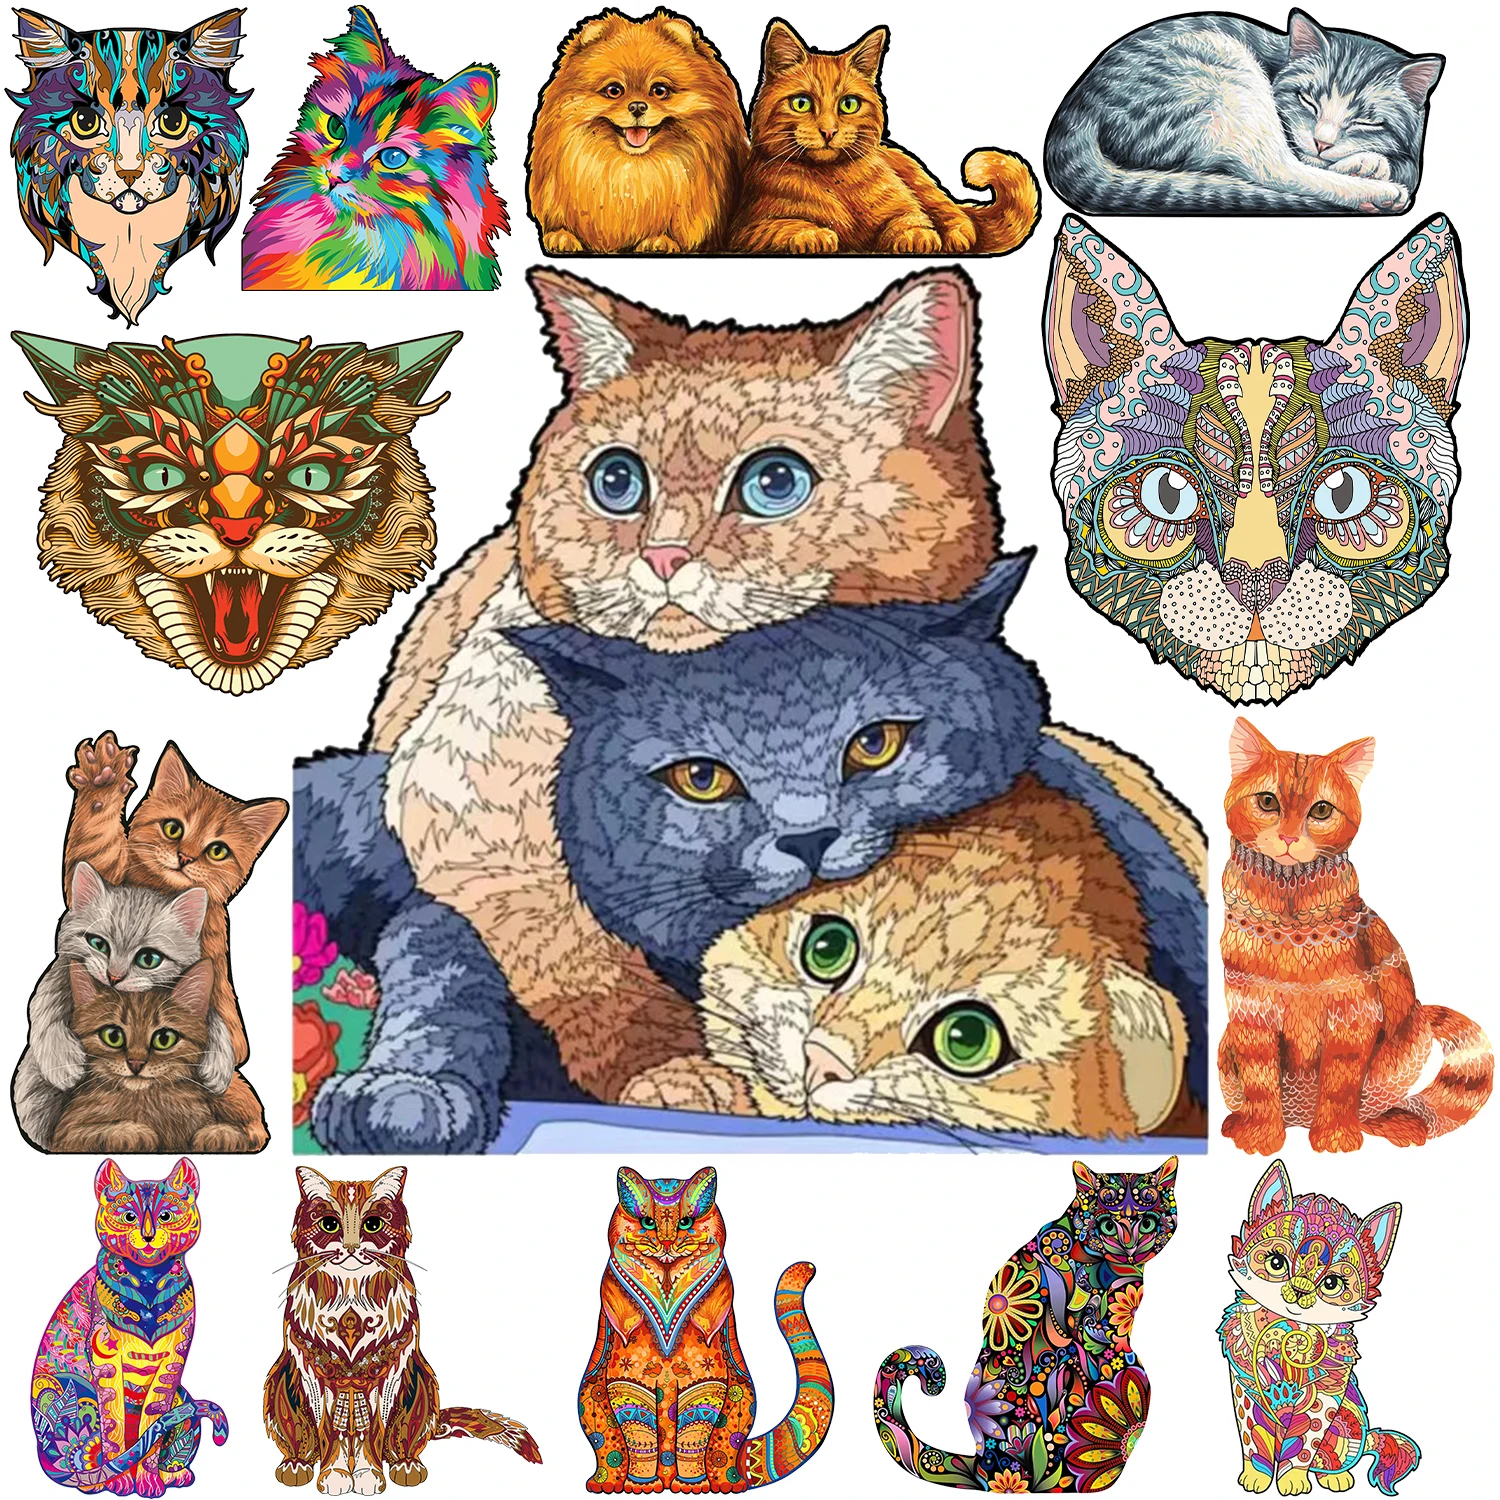 E cats animals shape kids puzzle educational toys diy crafts gift intellectual exercise thumb200